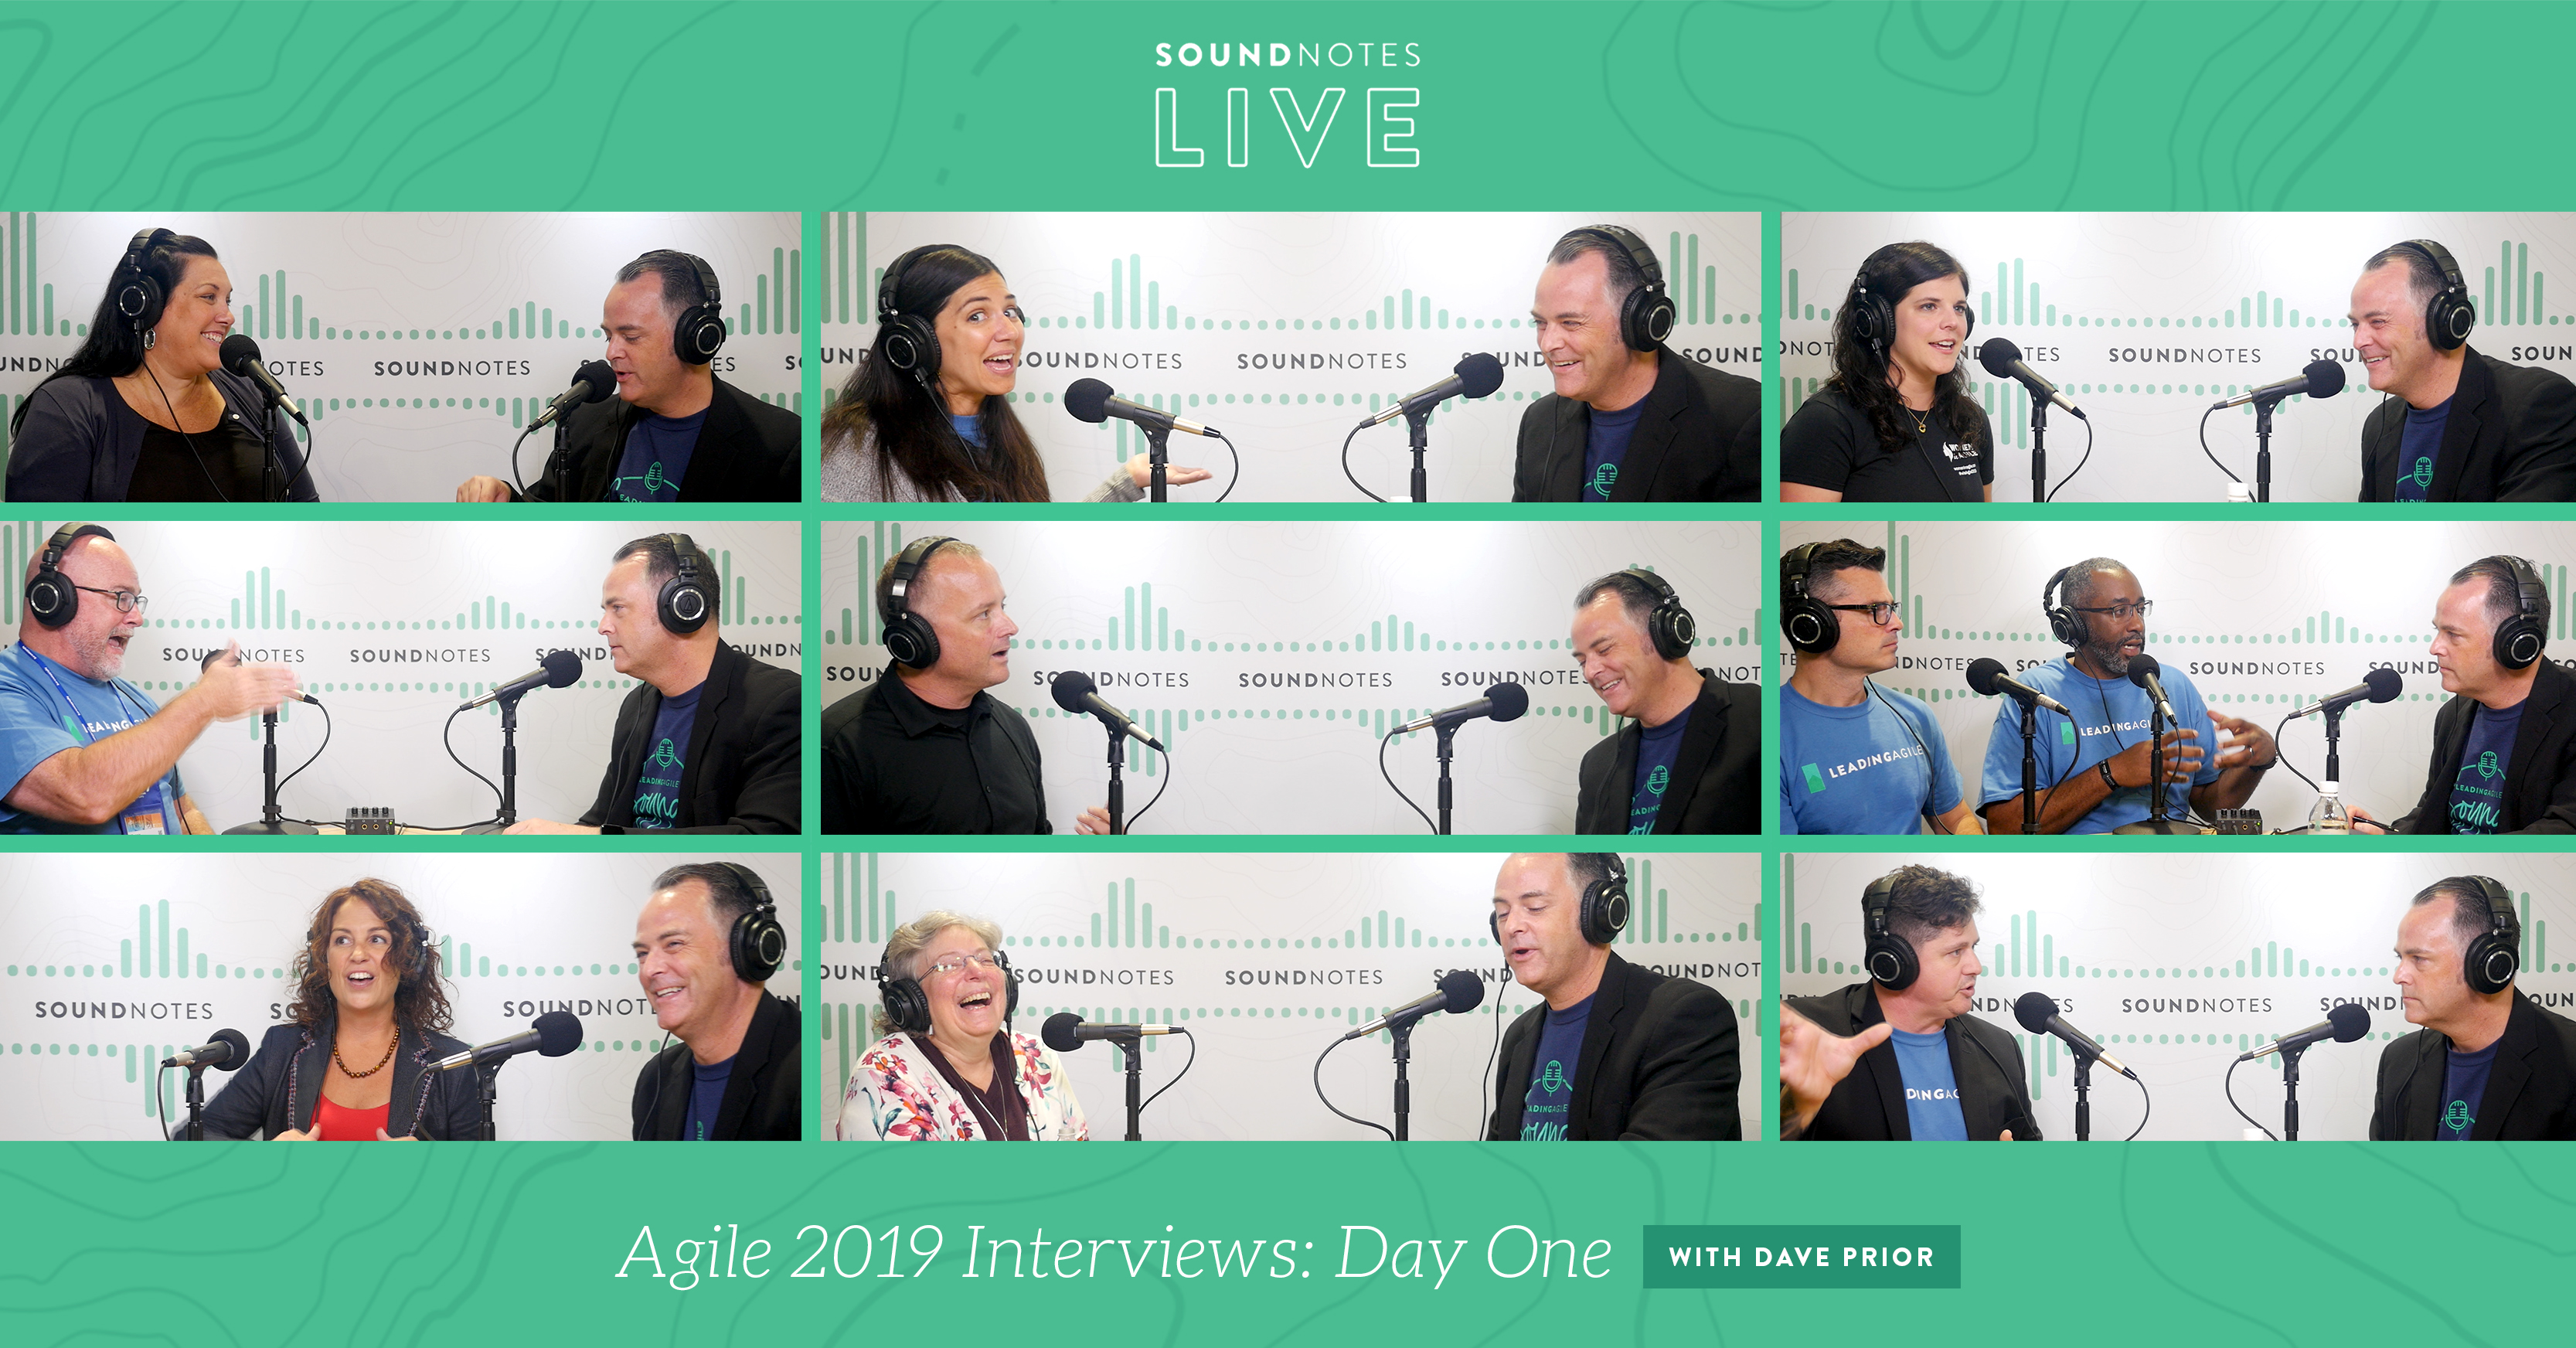 SoundNotes Live at Agile 2019: Day One